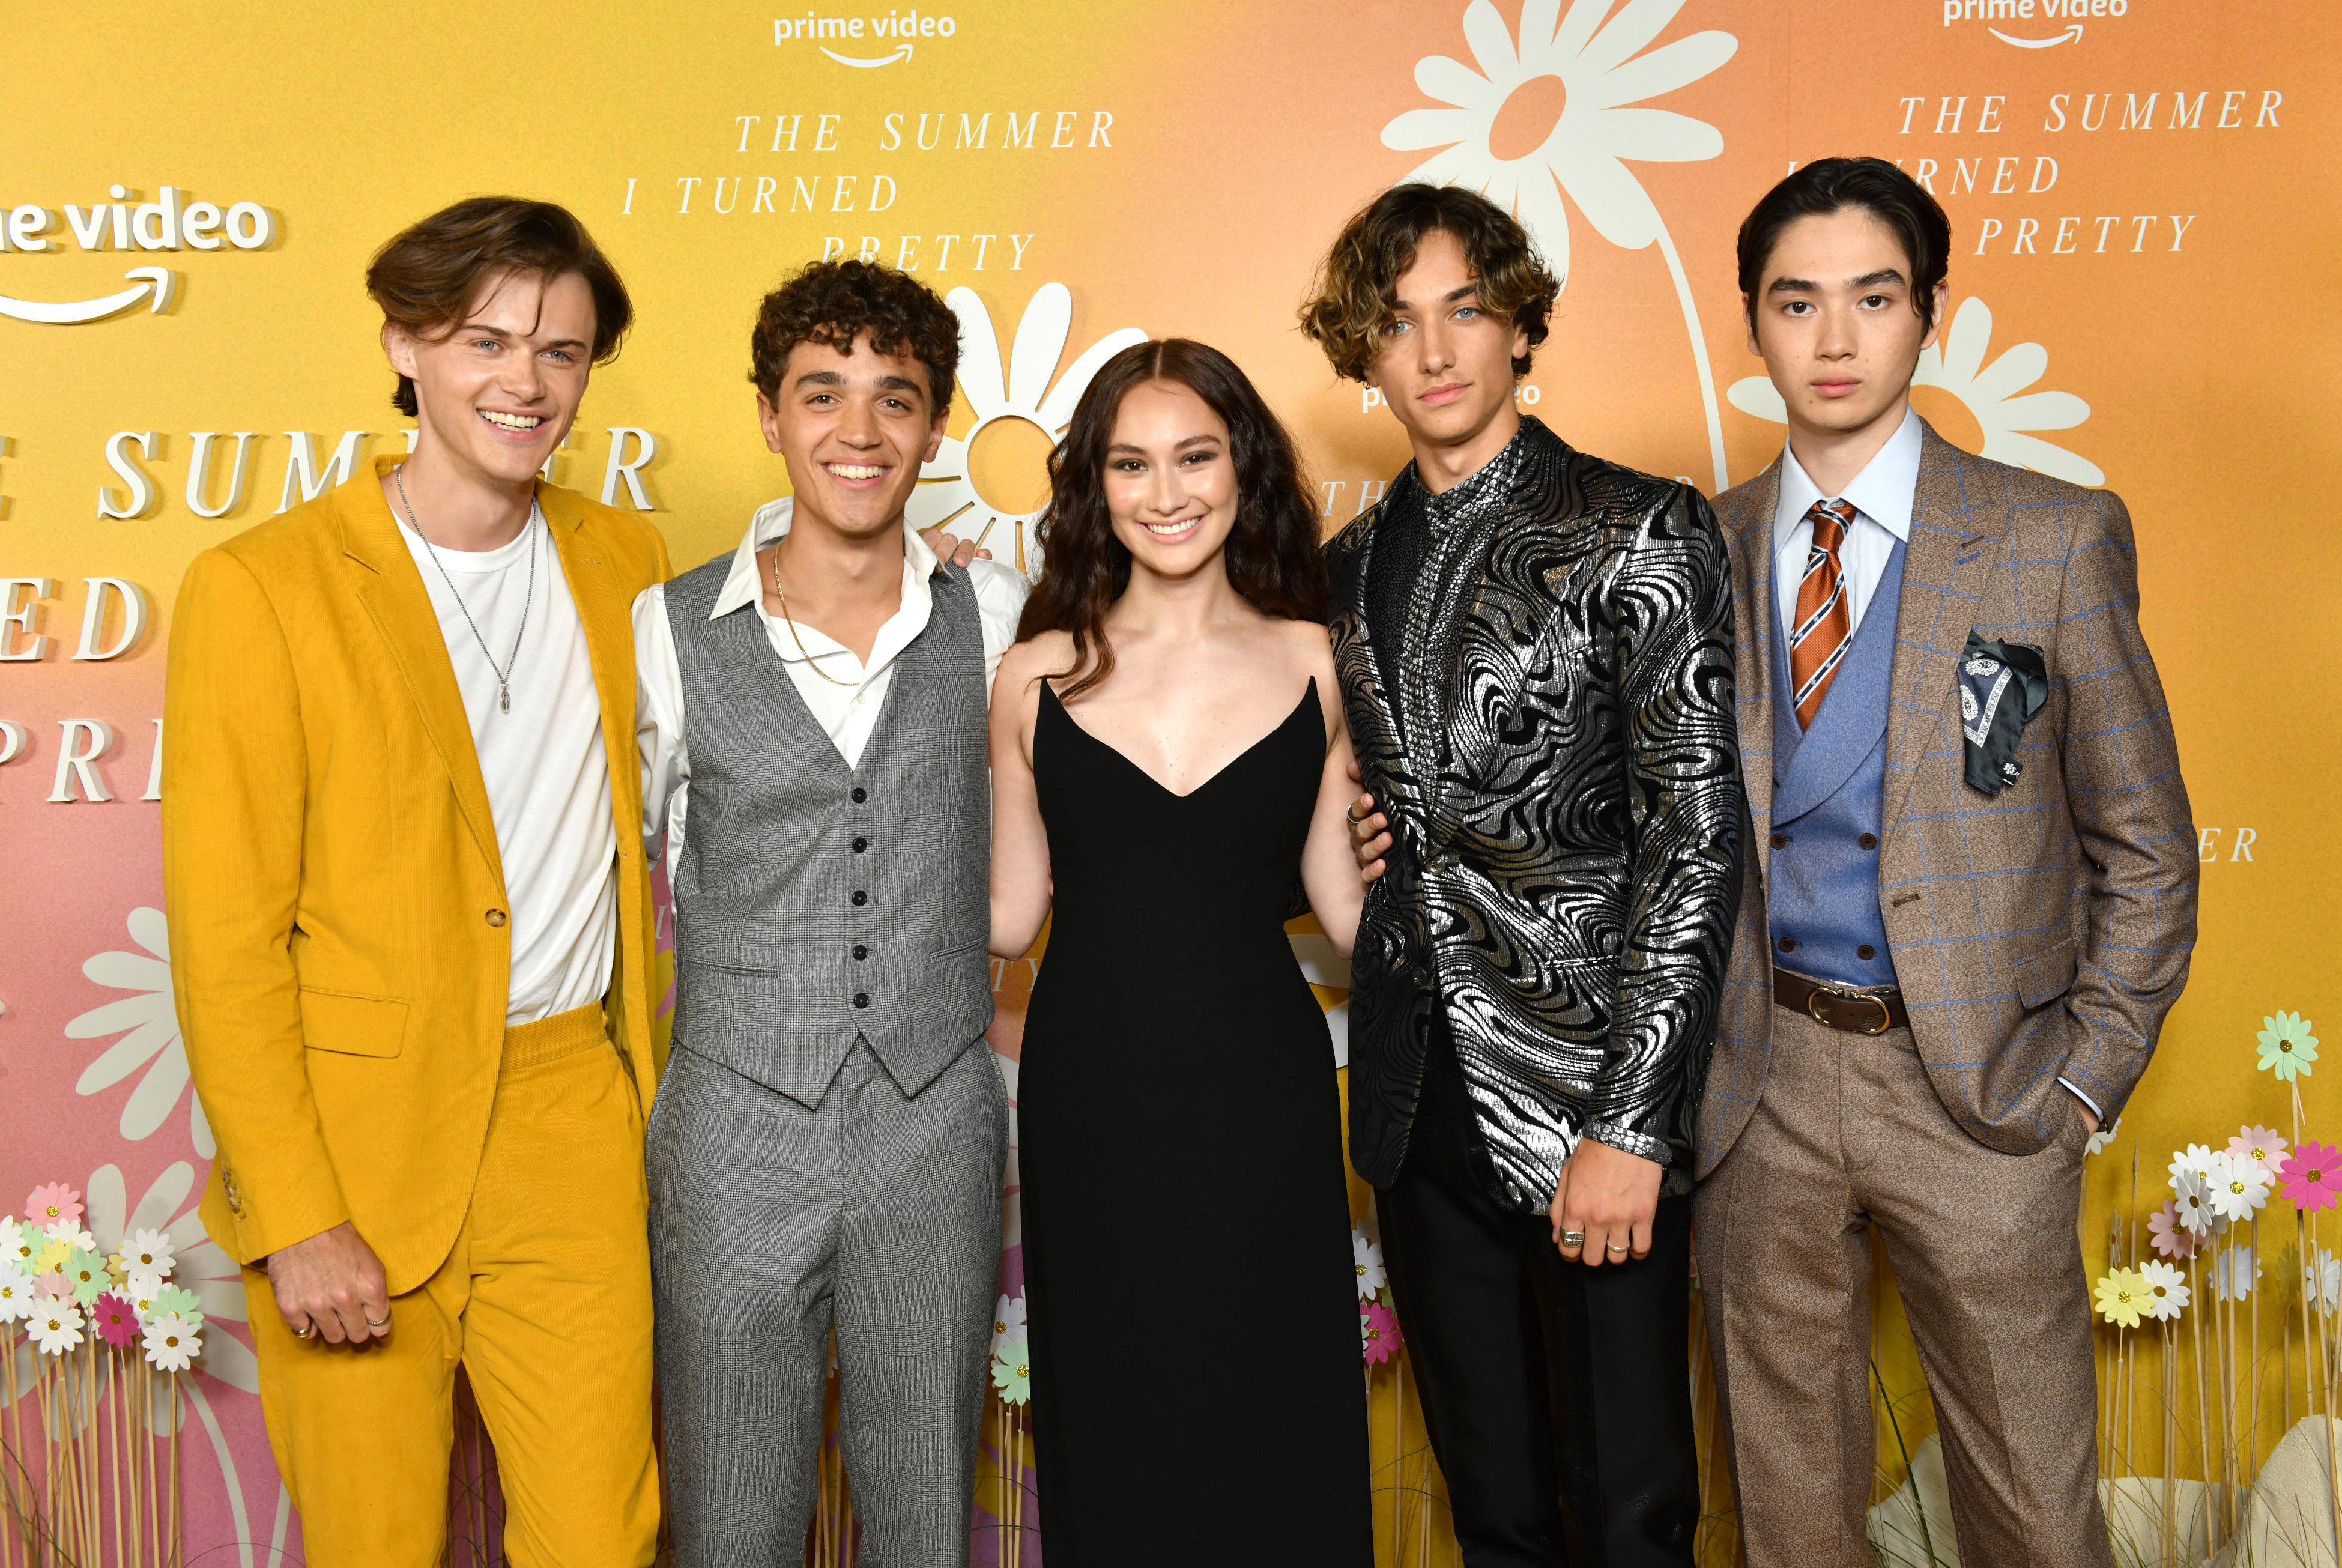 (L-R) Christopher Briney, David Iacono, Lola Tung, Gavin Casalegno and Sean Kaufman pose at the New York City premiere of the Prime Video series "The Summer I Turned Pretty" on June 14, 2022, in New York City | Source: Getty Images